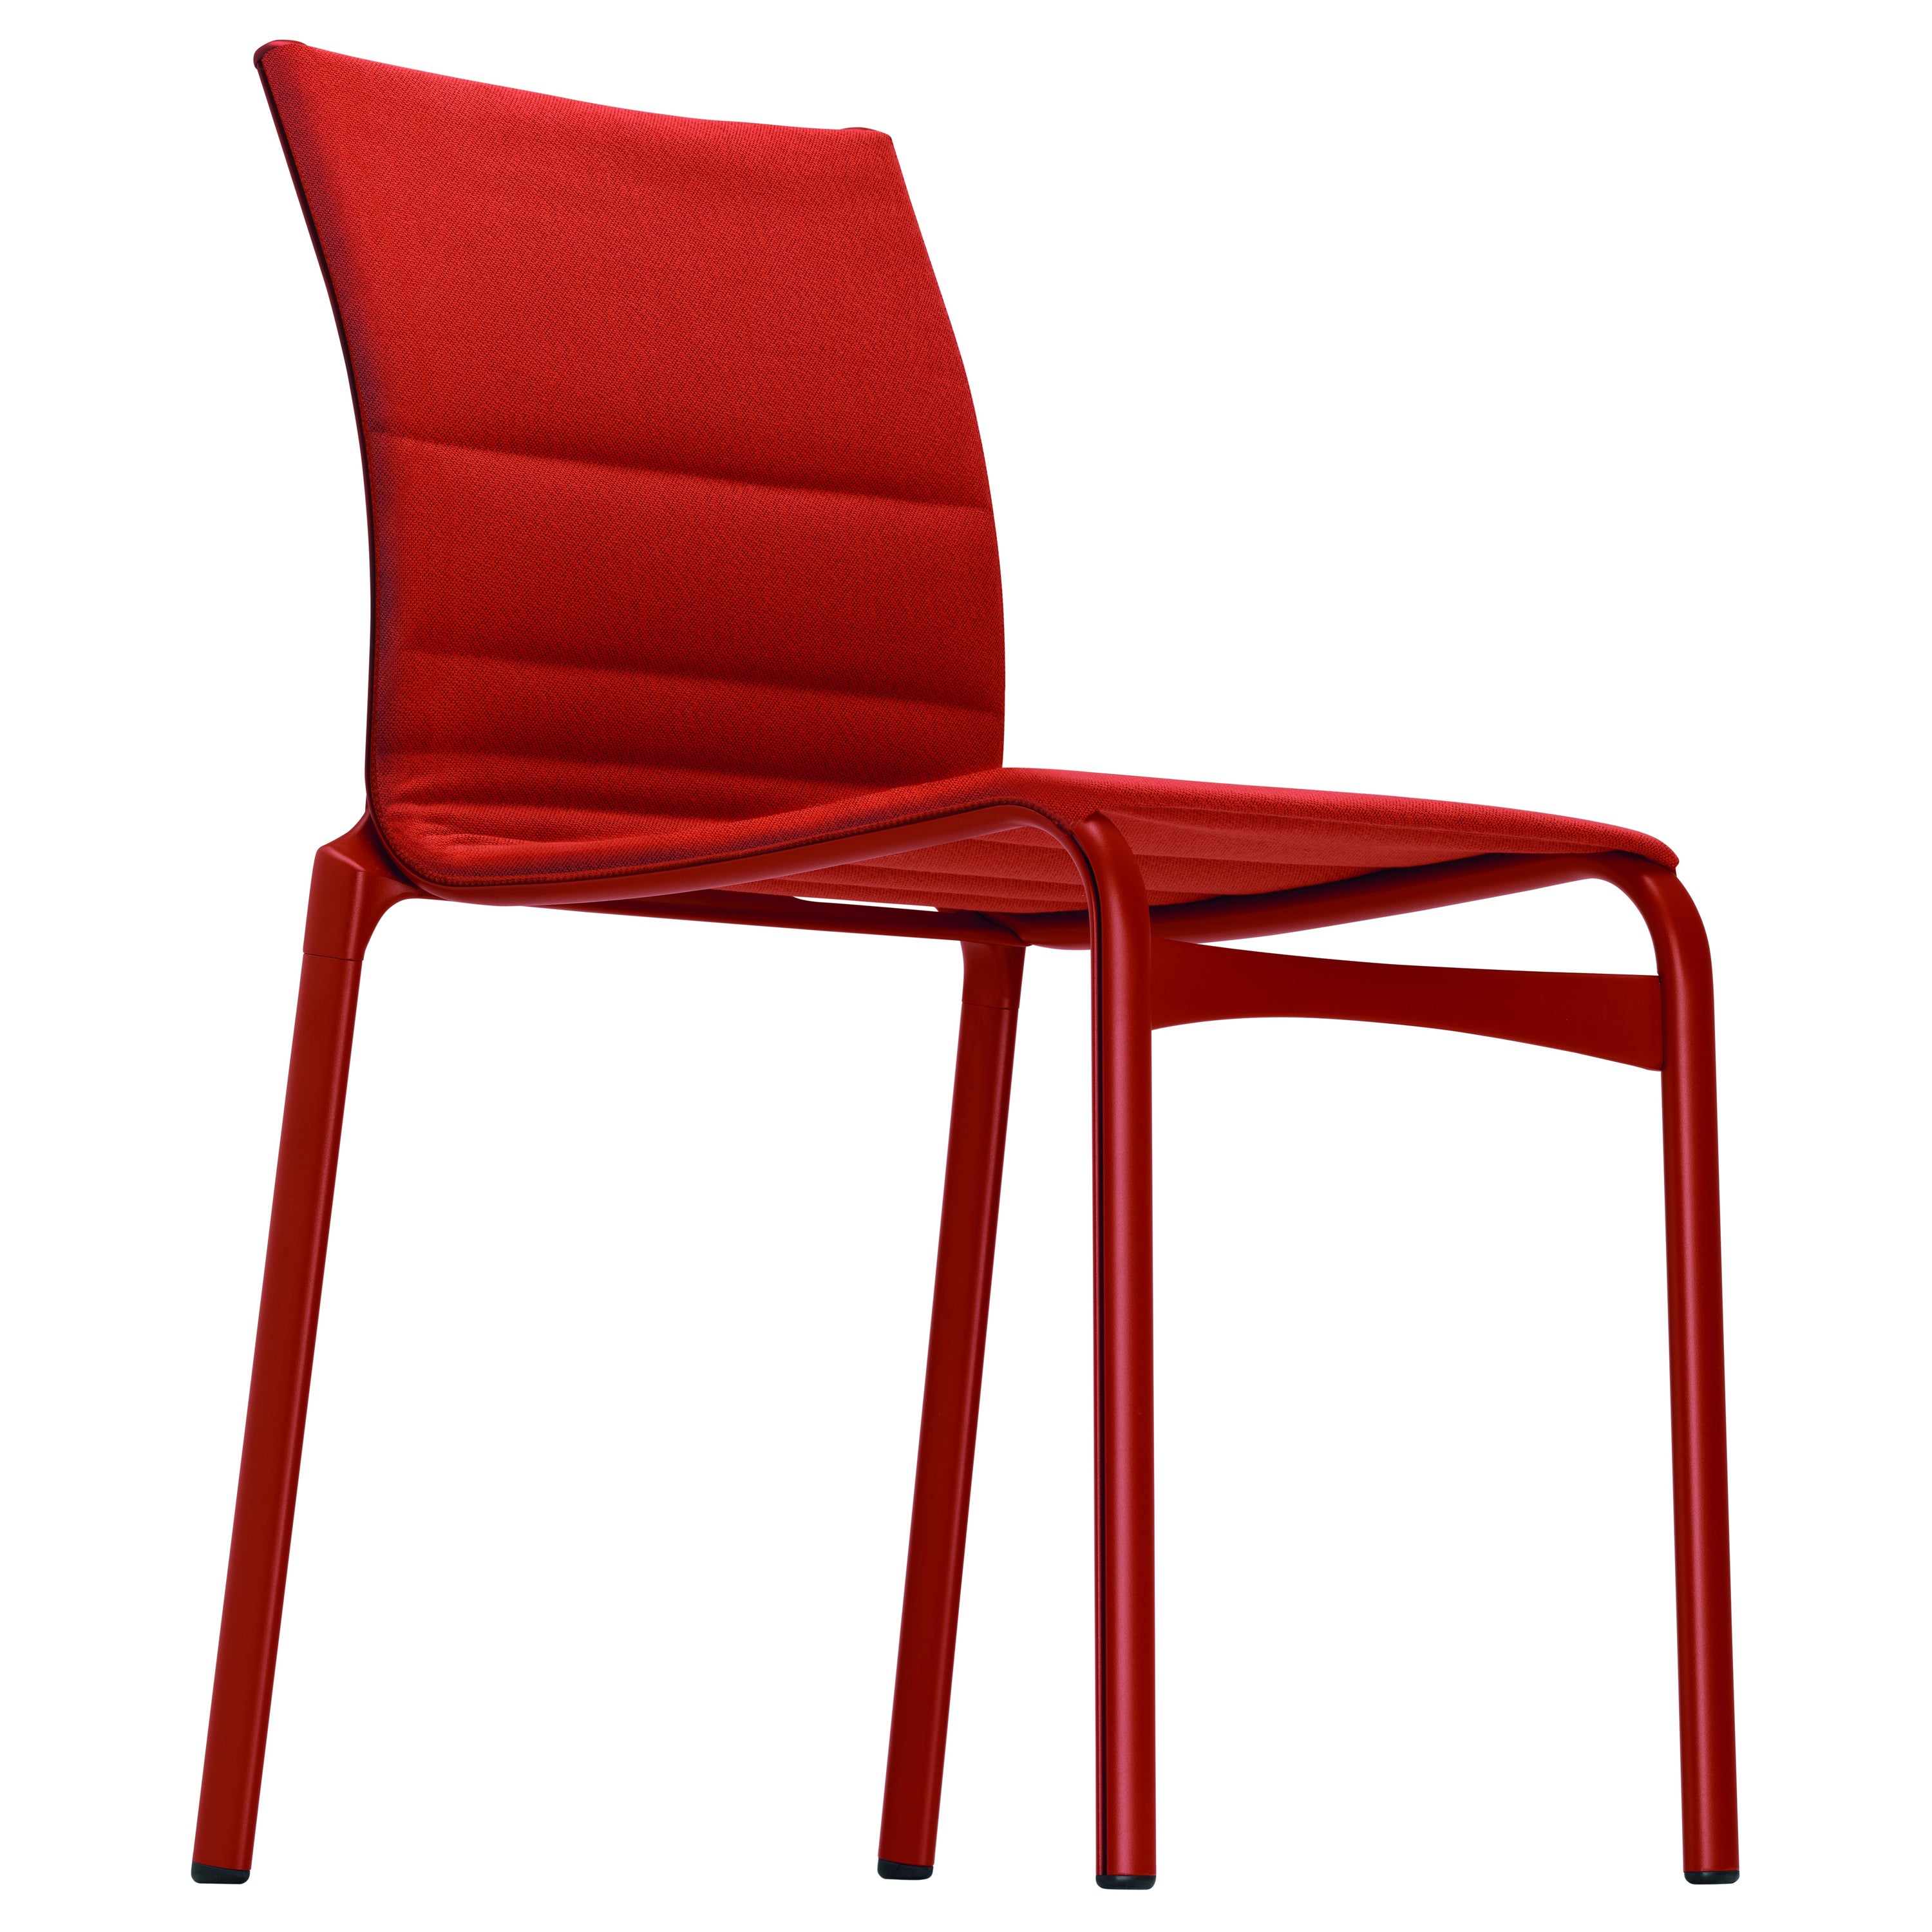 Alias Bigframe 44 Chair in Red SC02 Upholstery with Lacquered Aluminium Frame